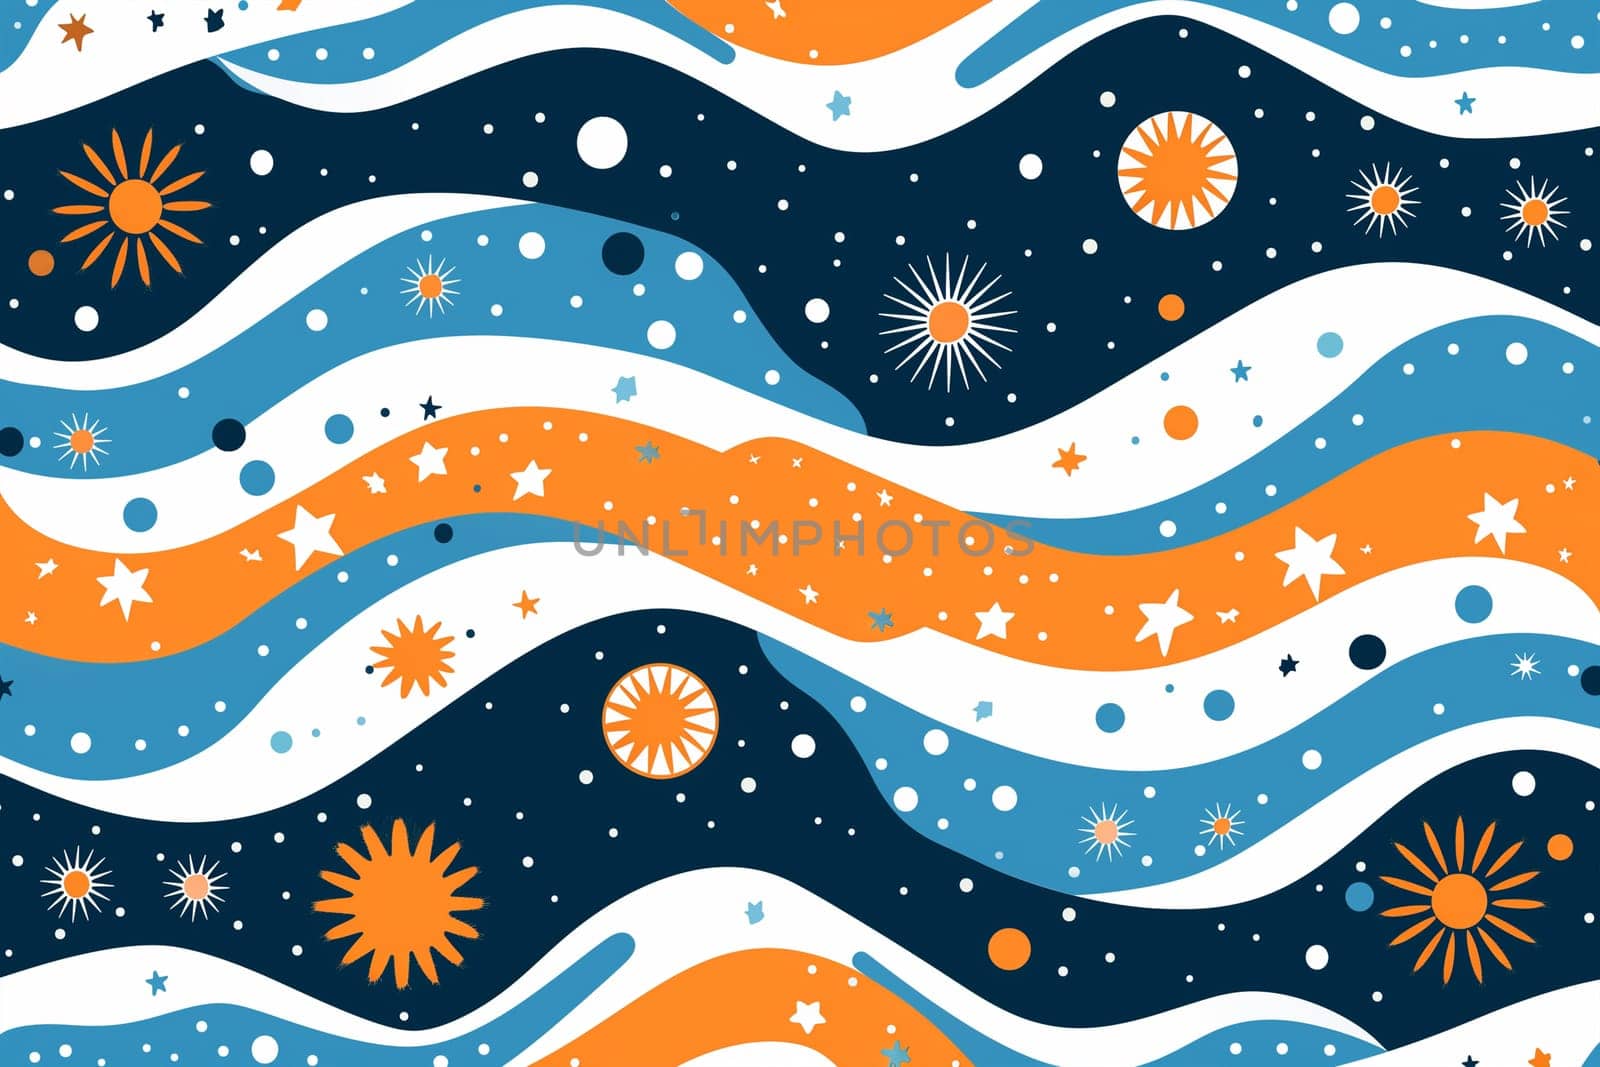 Blue and Orange Background With Stars and Waves by Sd28DimoN_1976